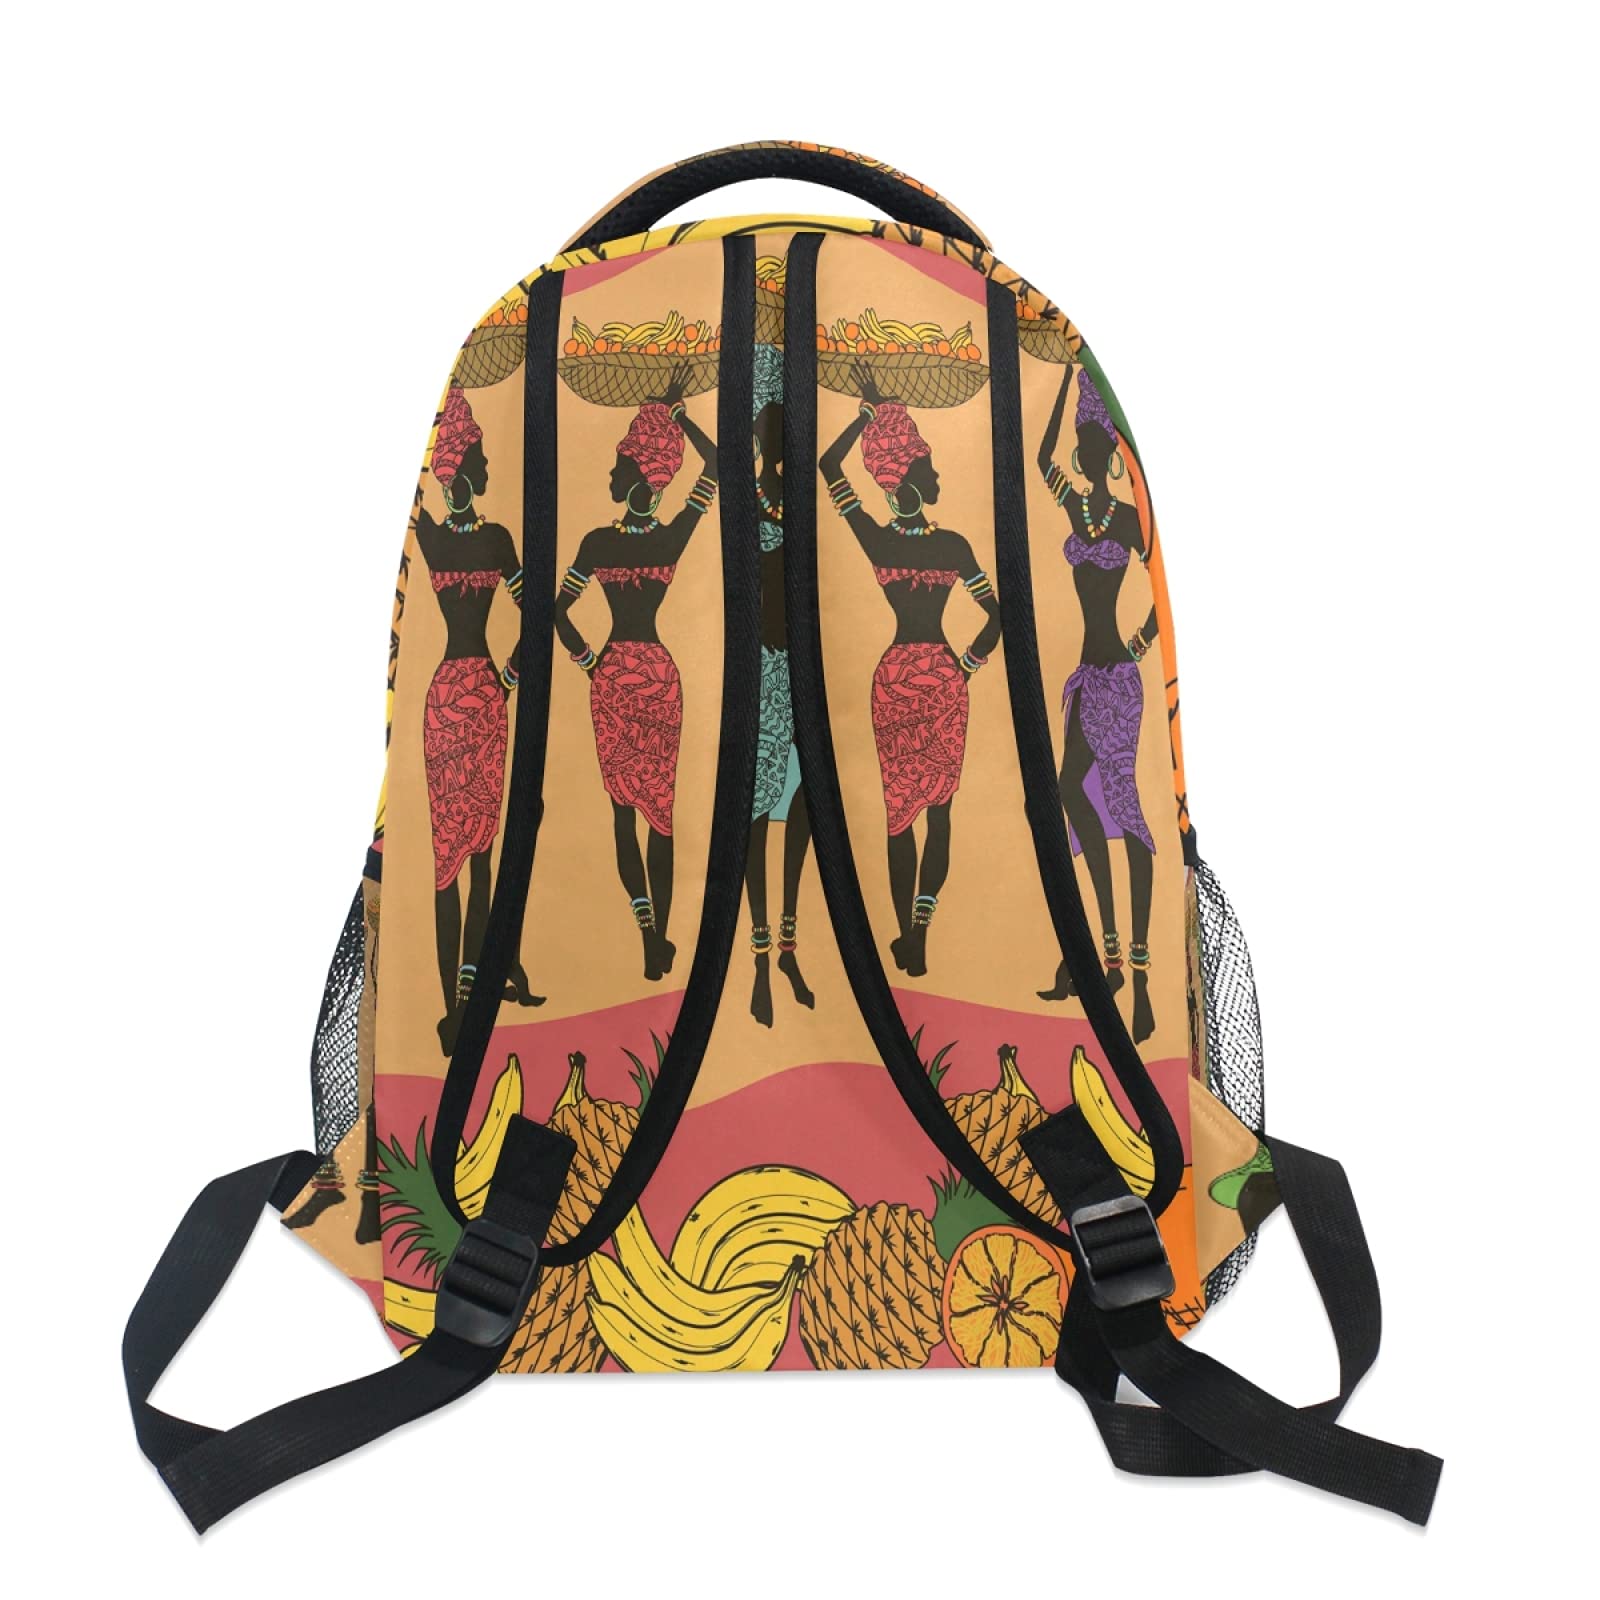 ALAZA Colorful African Fruits Travel Laptop Backpack Durable College School Backpack